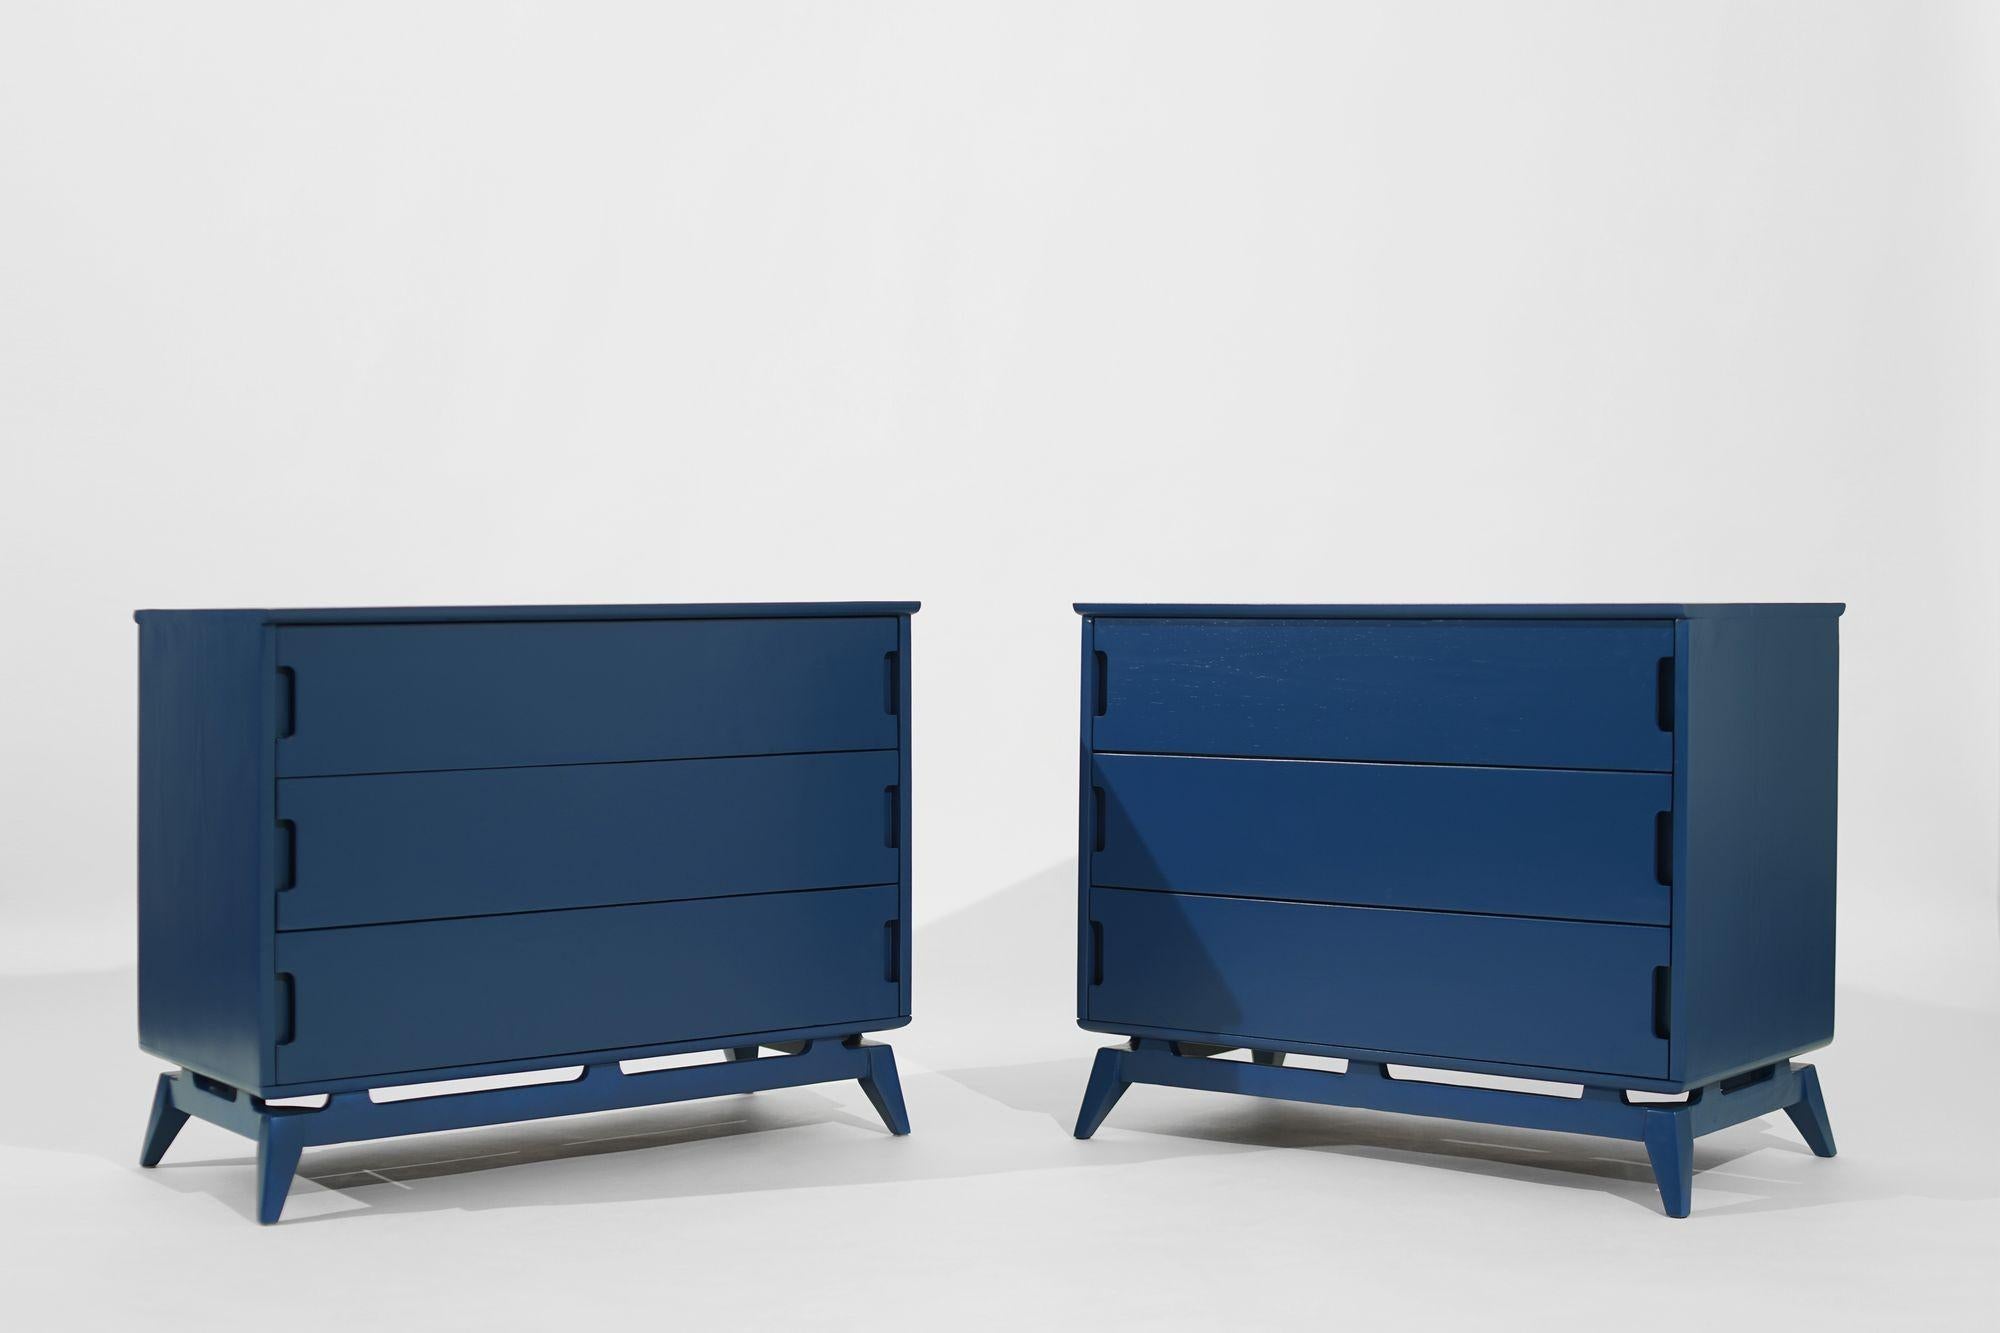 Exquisite Mid-Century Modern chests of drawers or bedside tables, a perfect blend of timeless design and contemporary flair. These stunning pieces feature three large storage drawers that effortlessly combine functionality with style, allowing you